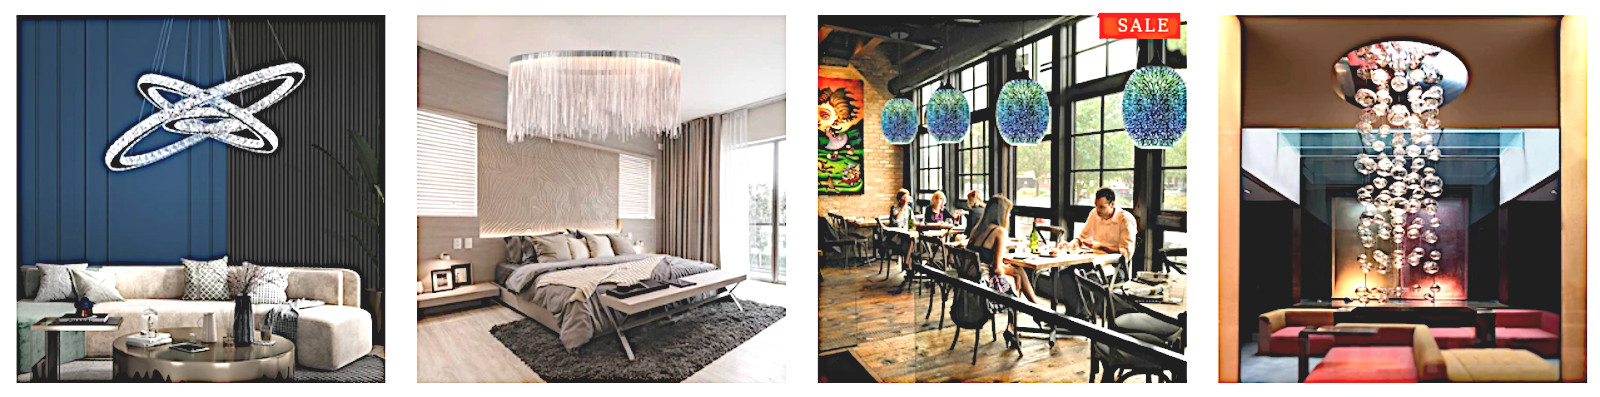 Discounted contemporary chandeliers